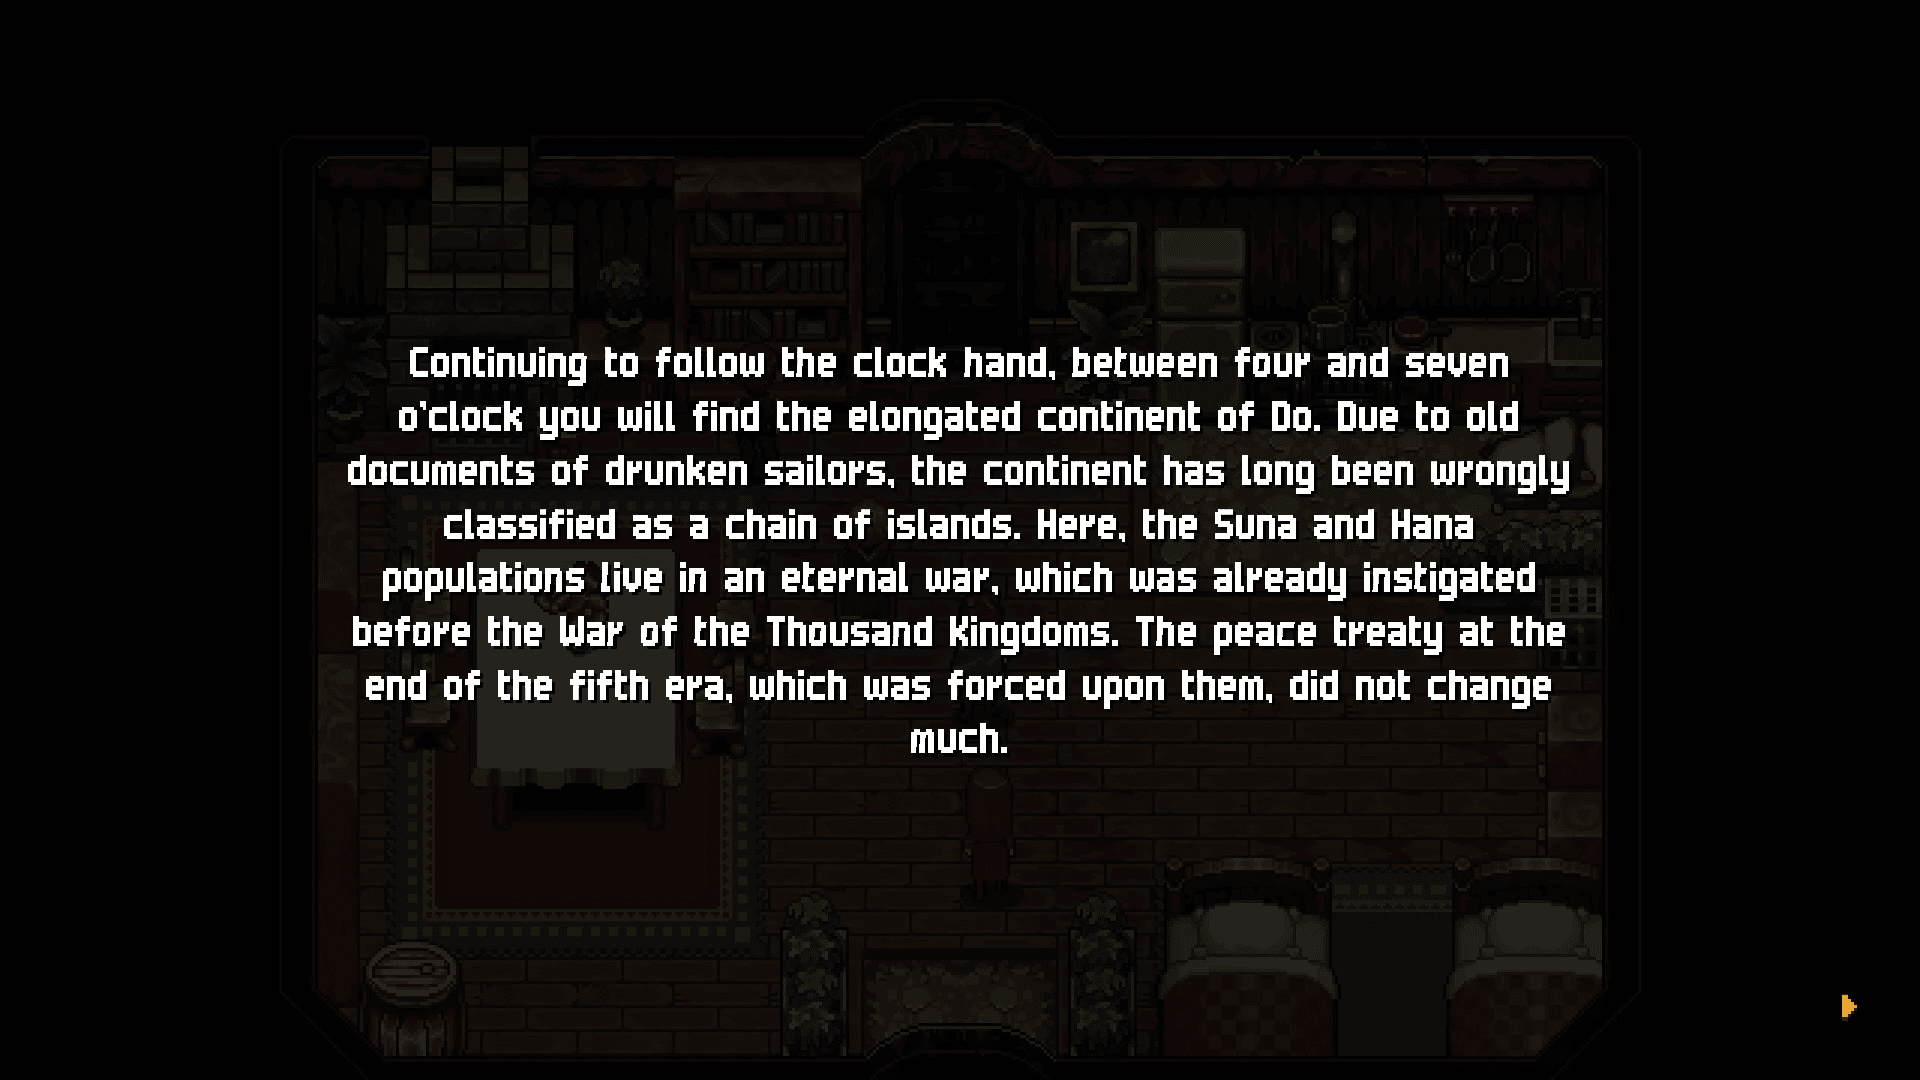 Chained Echoes is a Must Play for all Chrono Trigger fans. I have really  enjoyed the story and battle mechanics. There are also subtle references to  JRPGs past. Highly Recommend! : r/chronotrigger